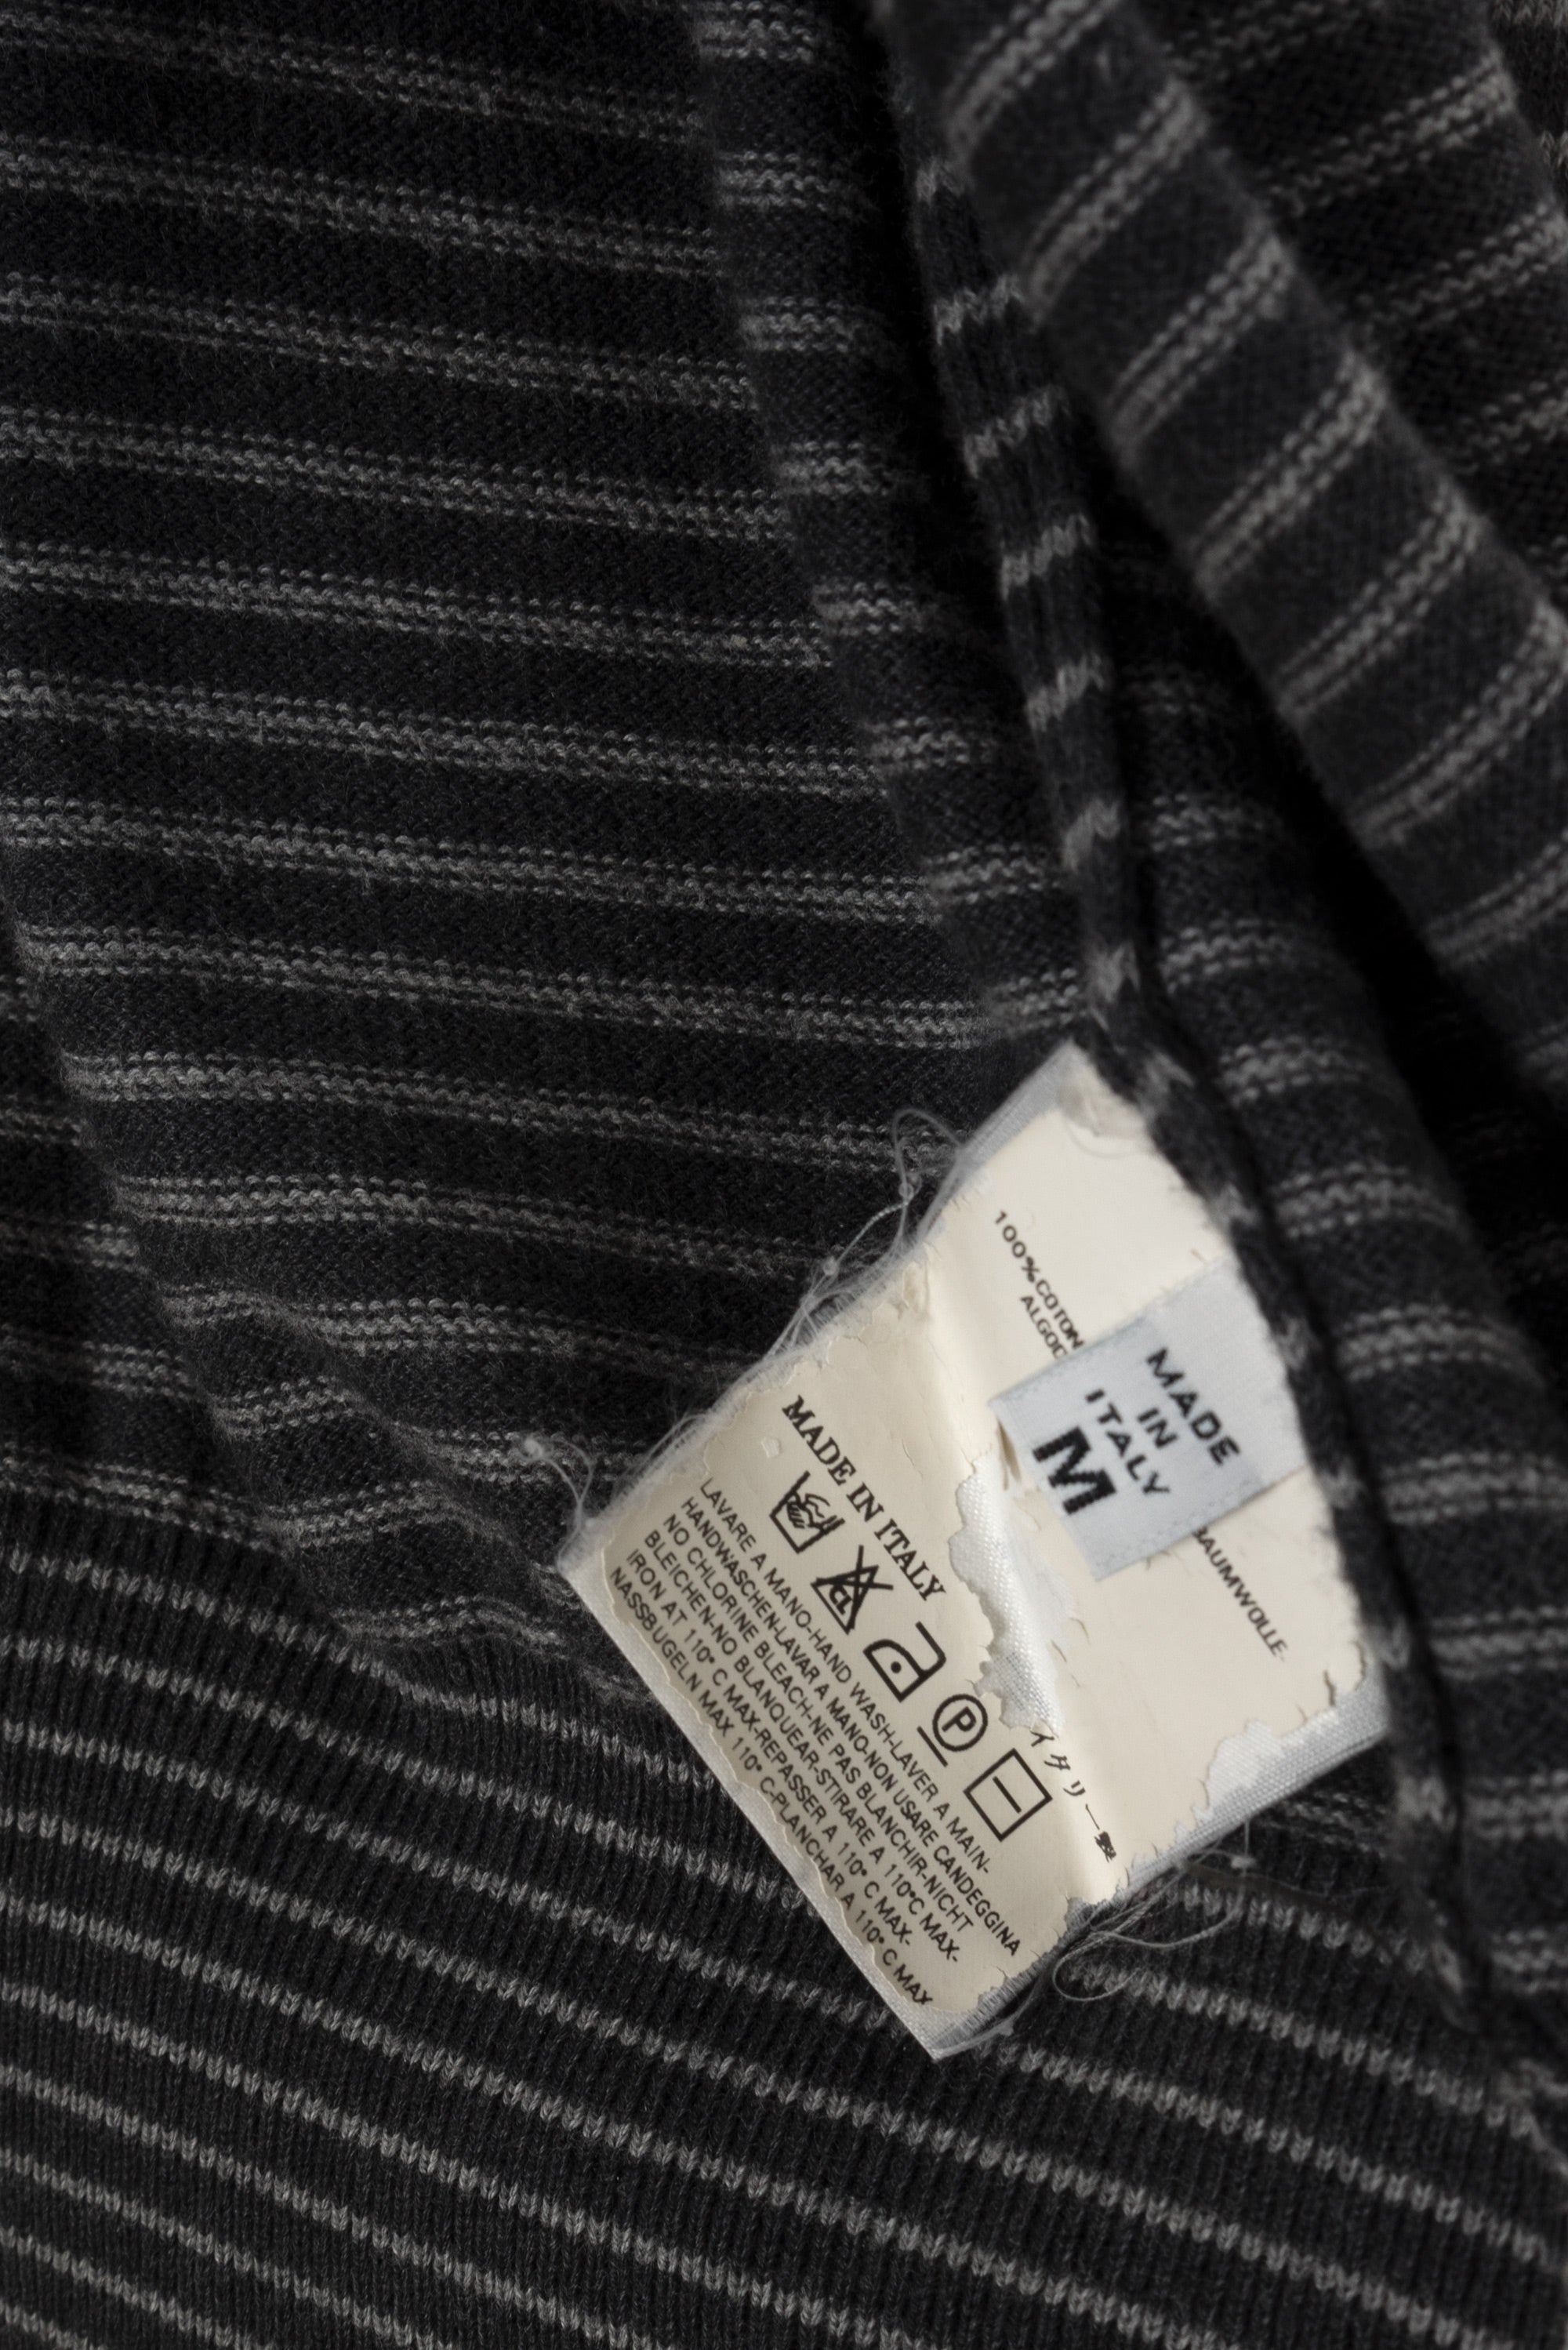 2007 S/S STRIPED CARDIGAN IN FINEST COTTON